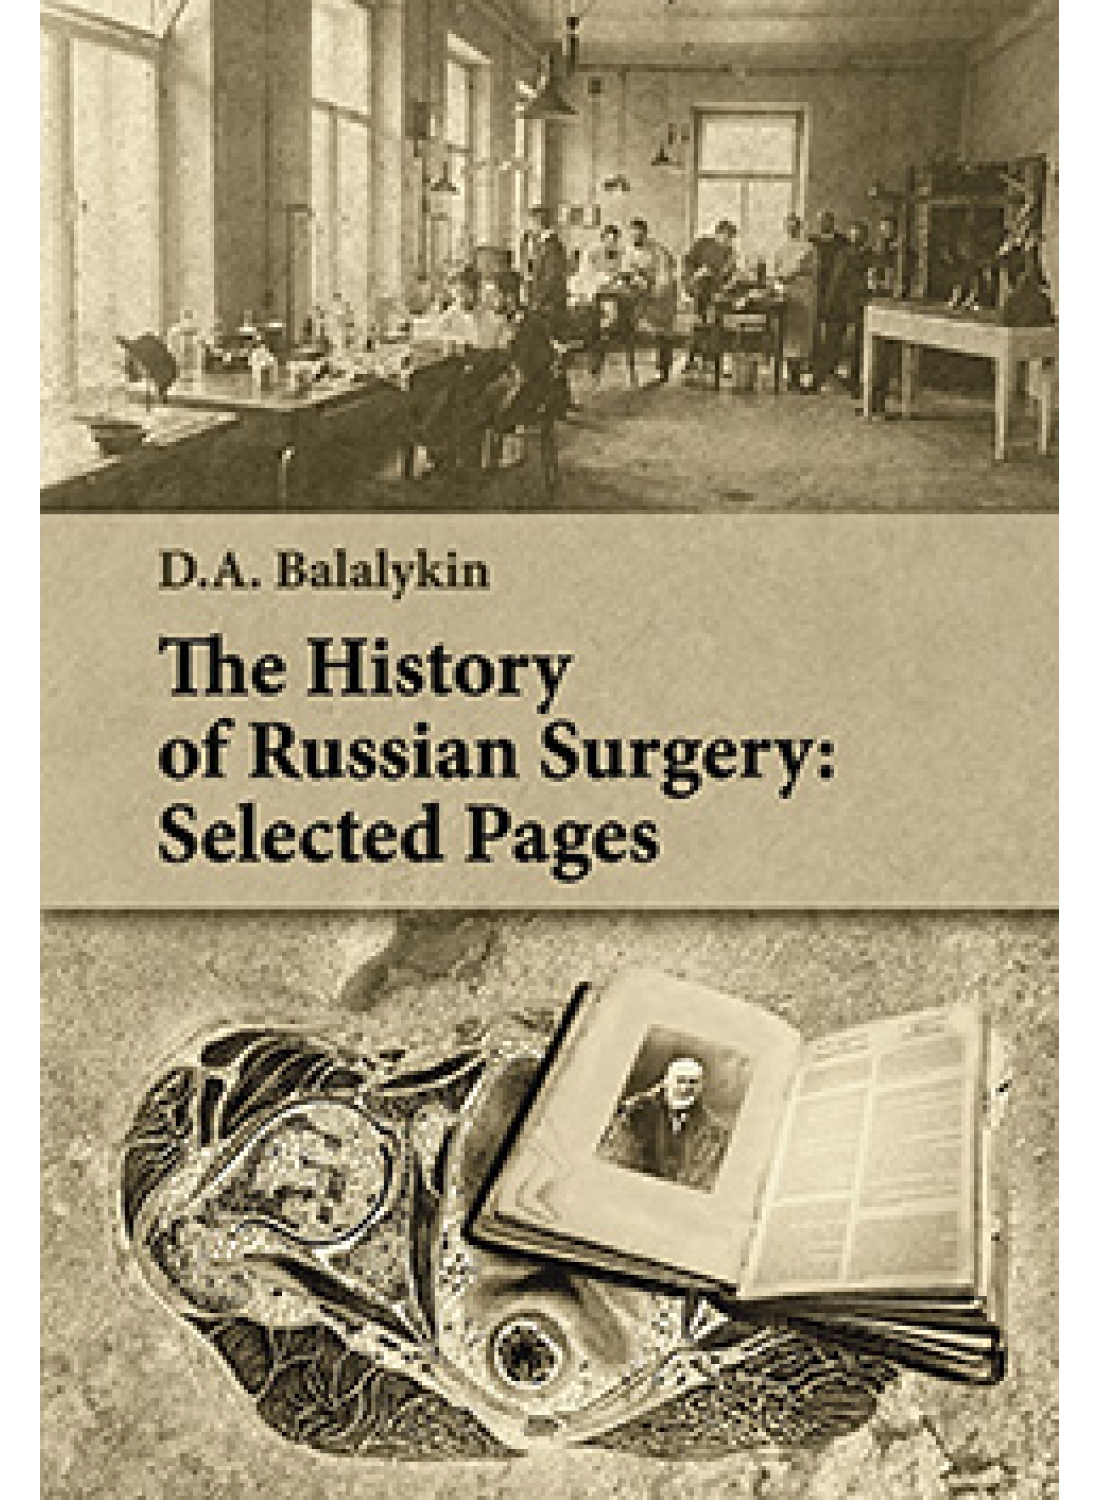 Balalykin D.A. The History of Russian Surgery. Selected Pages 